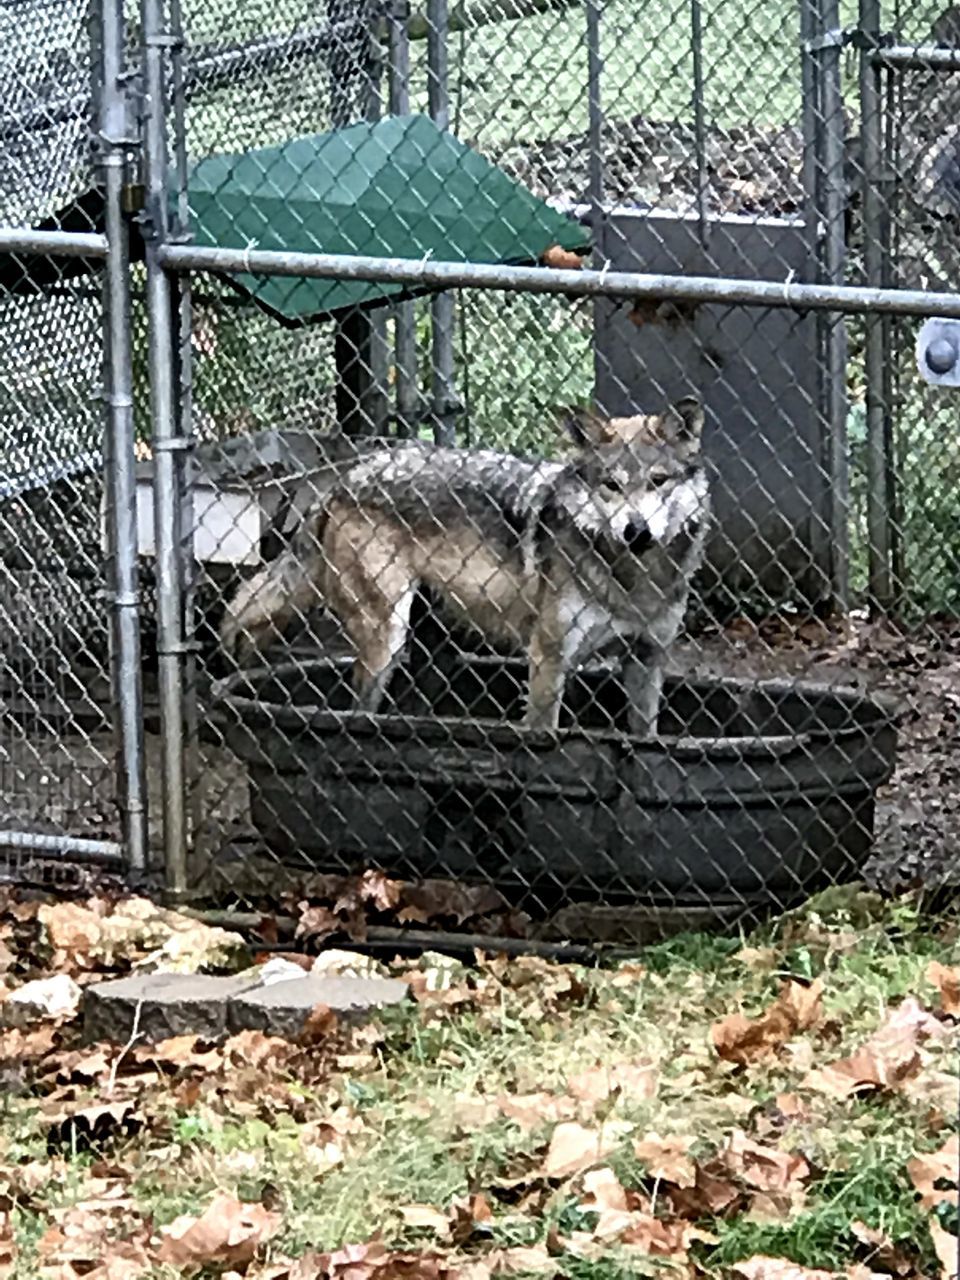 CAT IN CAGE SEEN THROUGH CHAINLINK FENCE IN ZOO